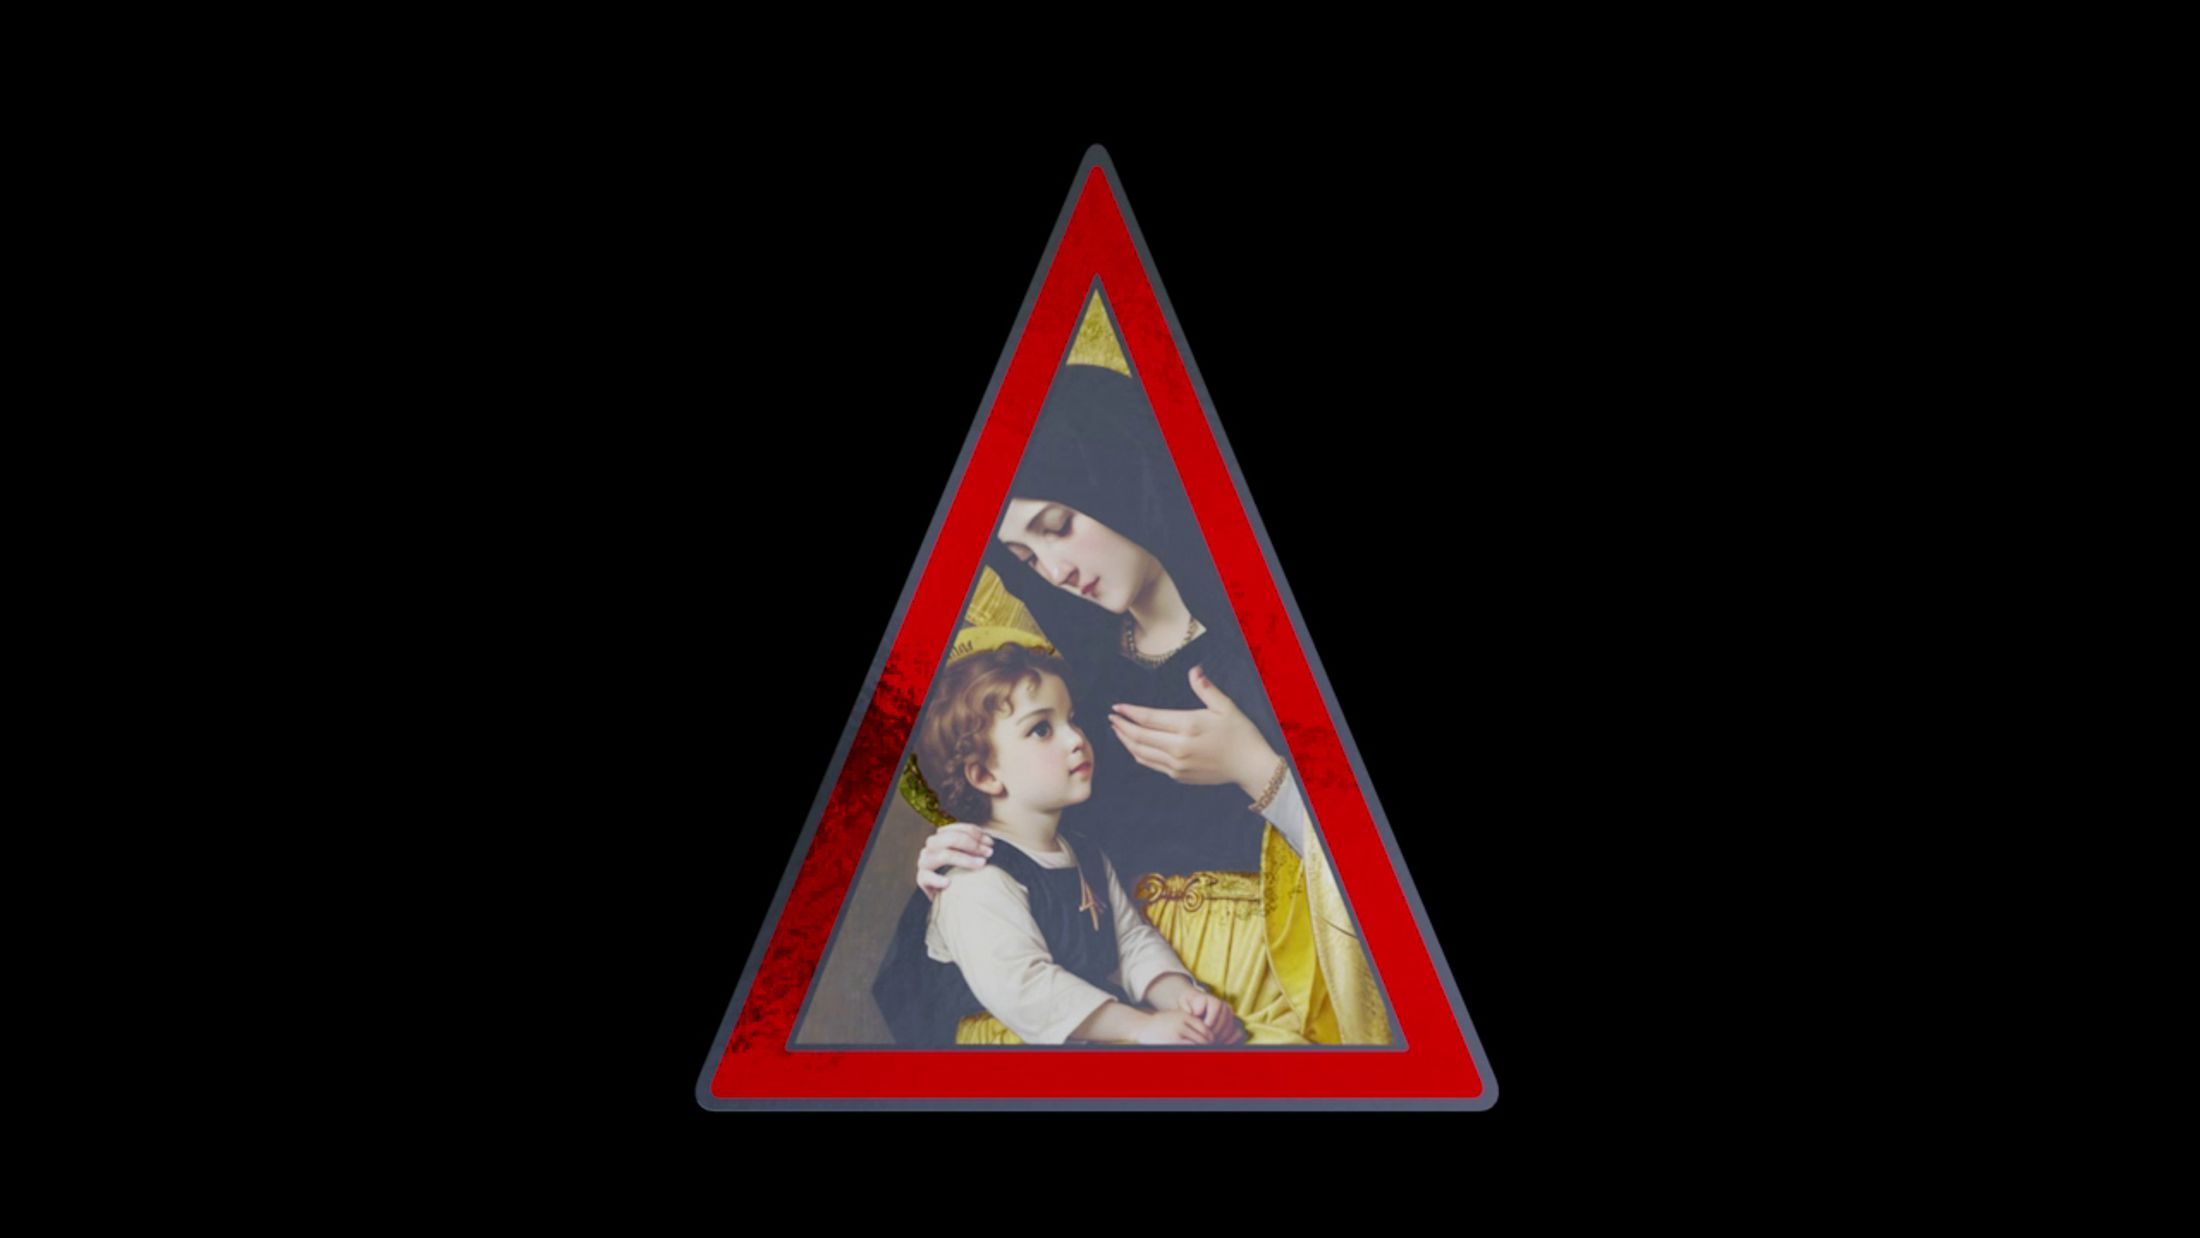 Still from DreamArena (2024) by Melle Nieling, a triangular trading card with a shiny picture of mother Mary with child Jesus